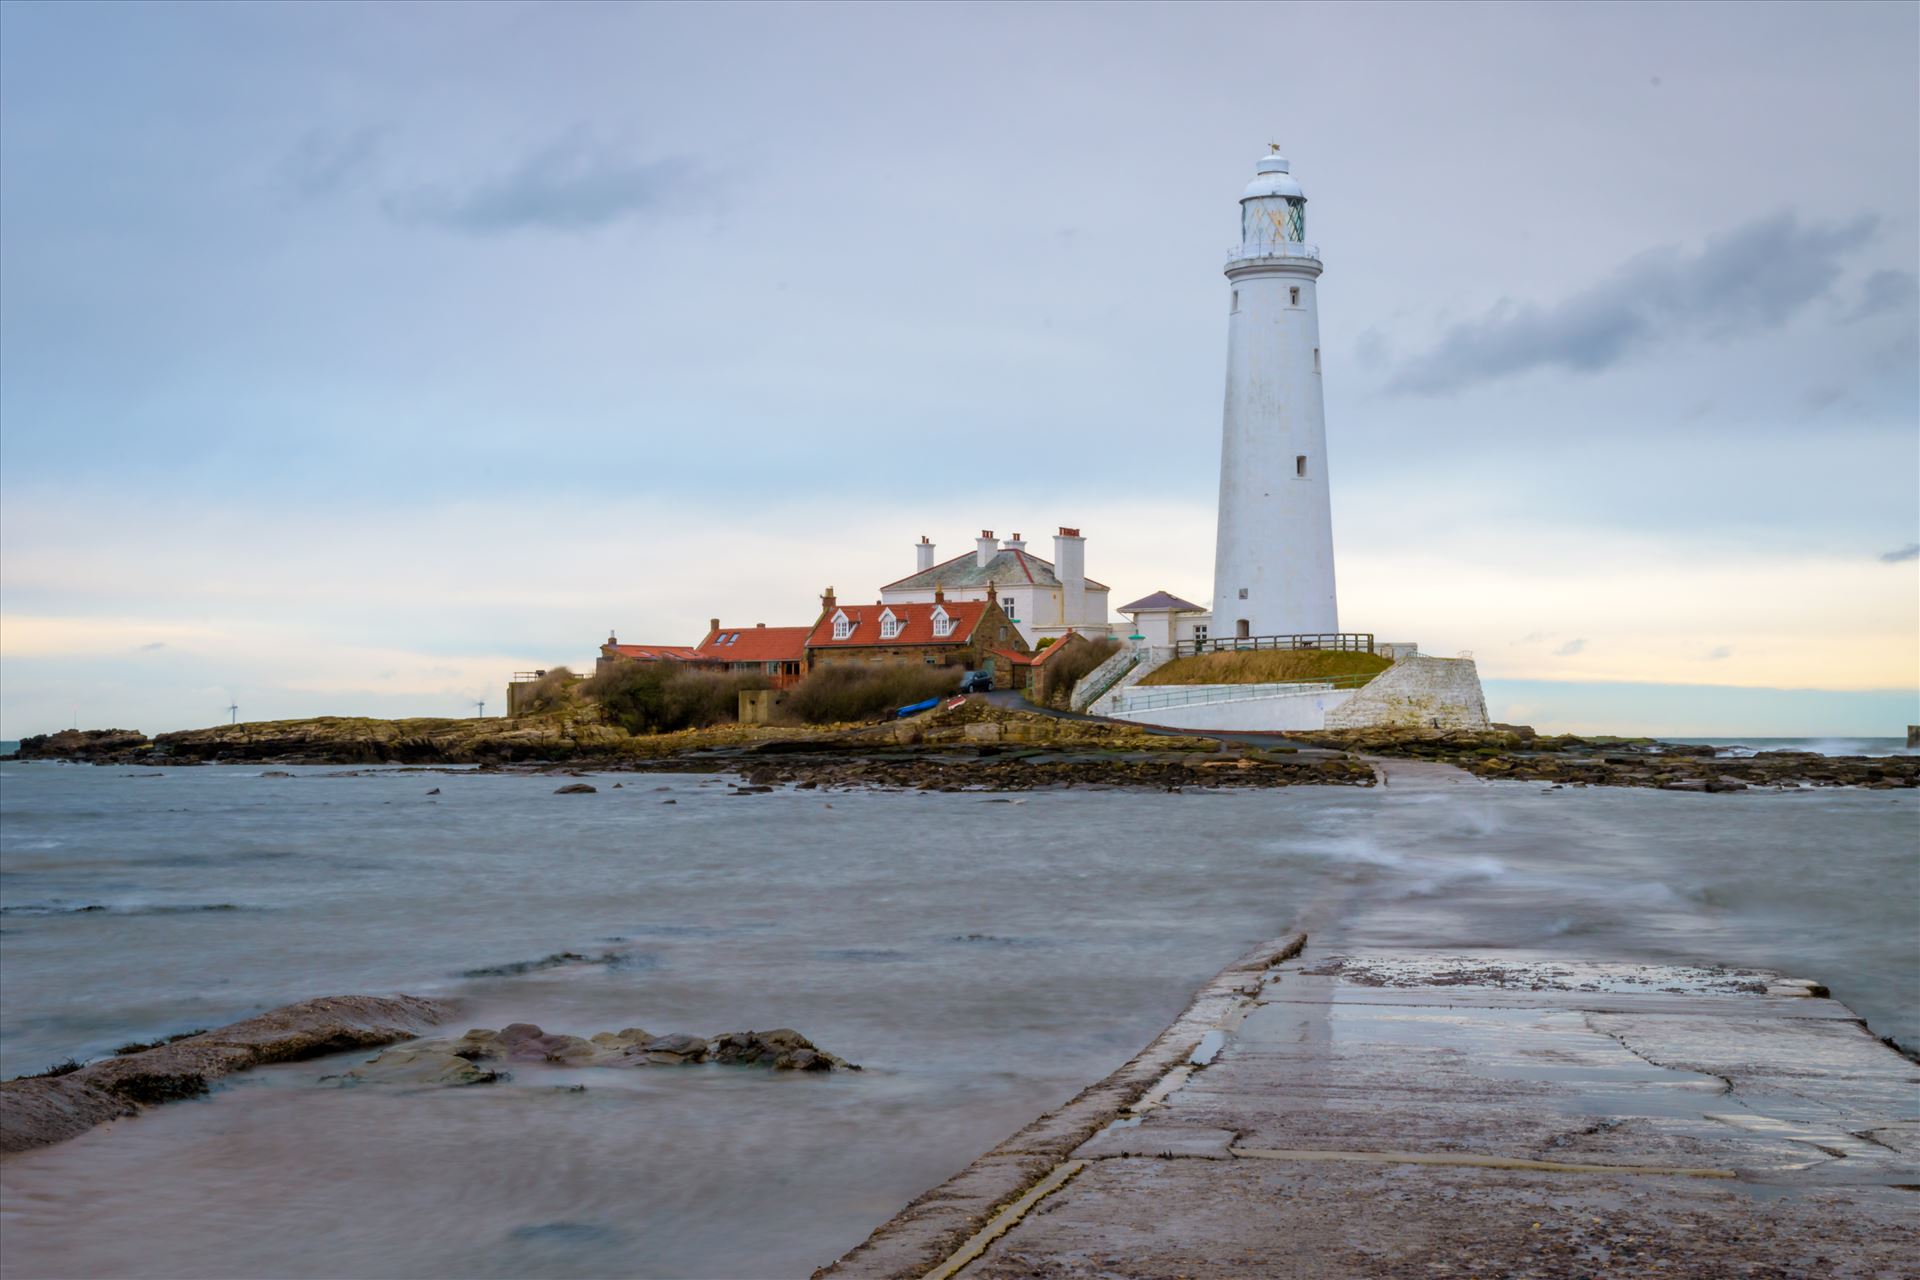 St Mary's Island, Whitley Bay.St. Mary's Island was originally called Bates Island, Hartley Bates or Bates Hill as it was originally owned by the Bates family.

The lighthouse continued to function until 1984, when it was taken out of service. The lighthouse is now open to visitors.